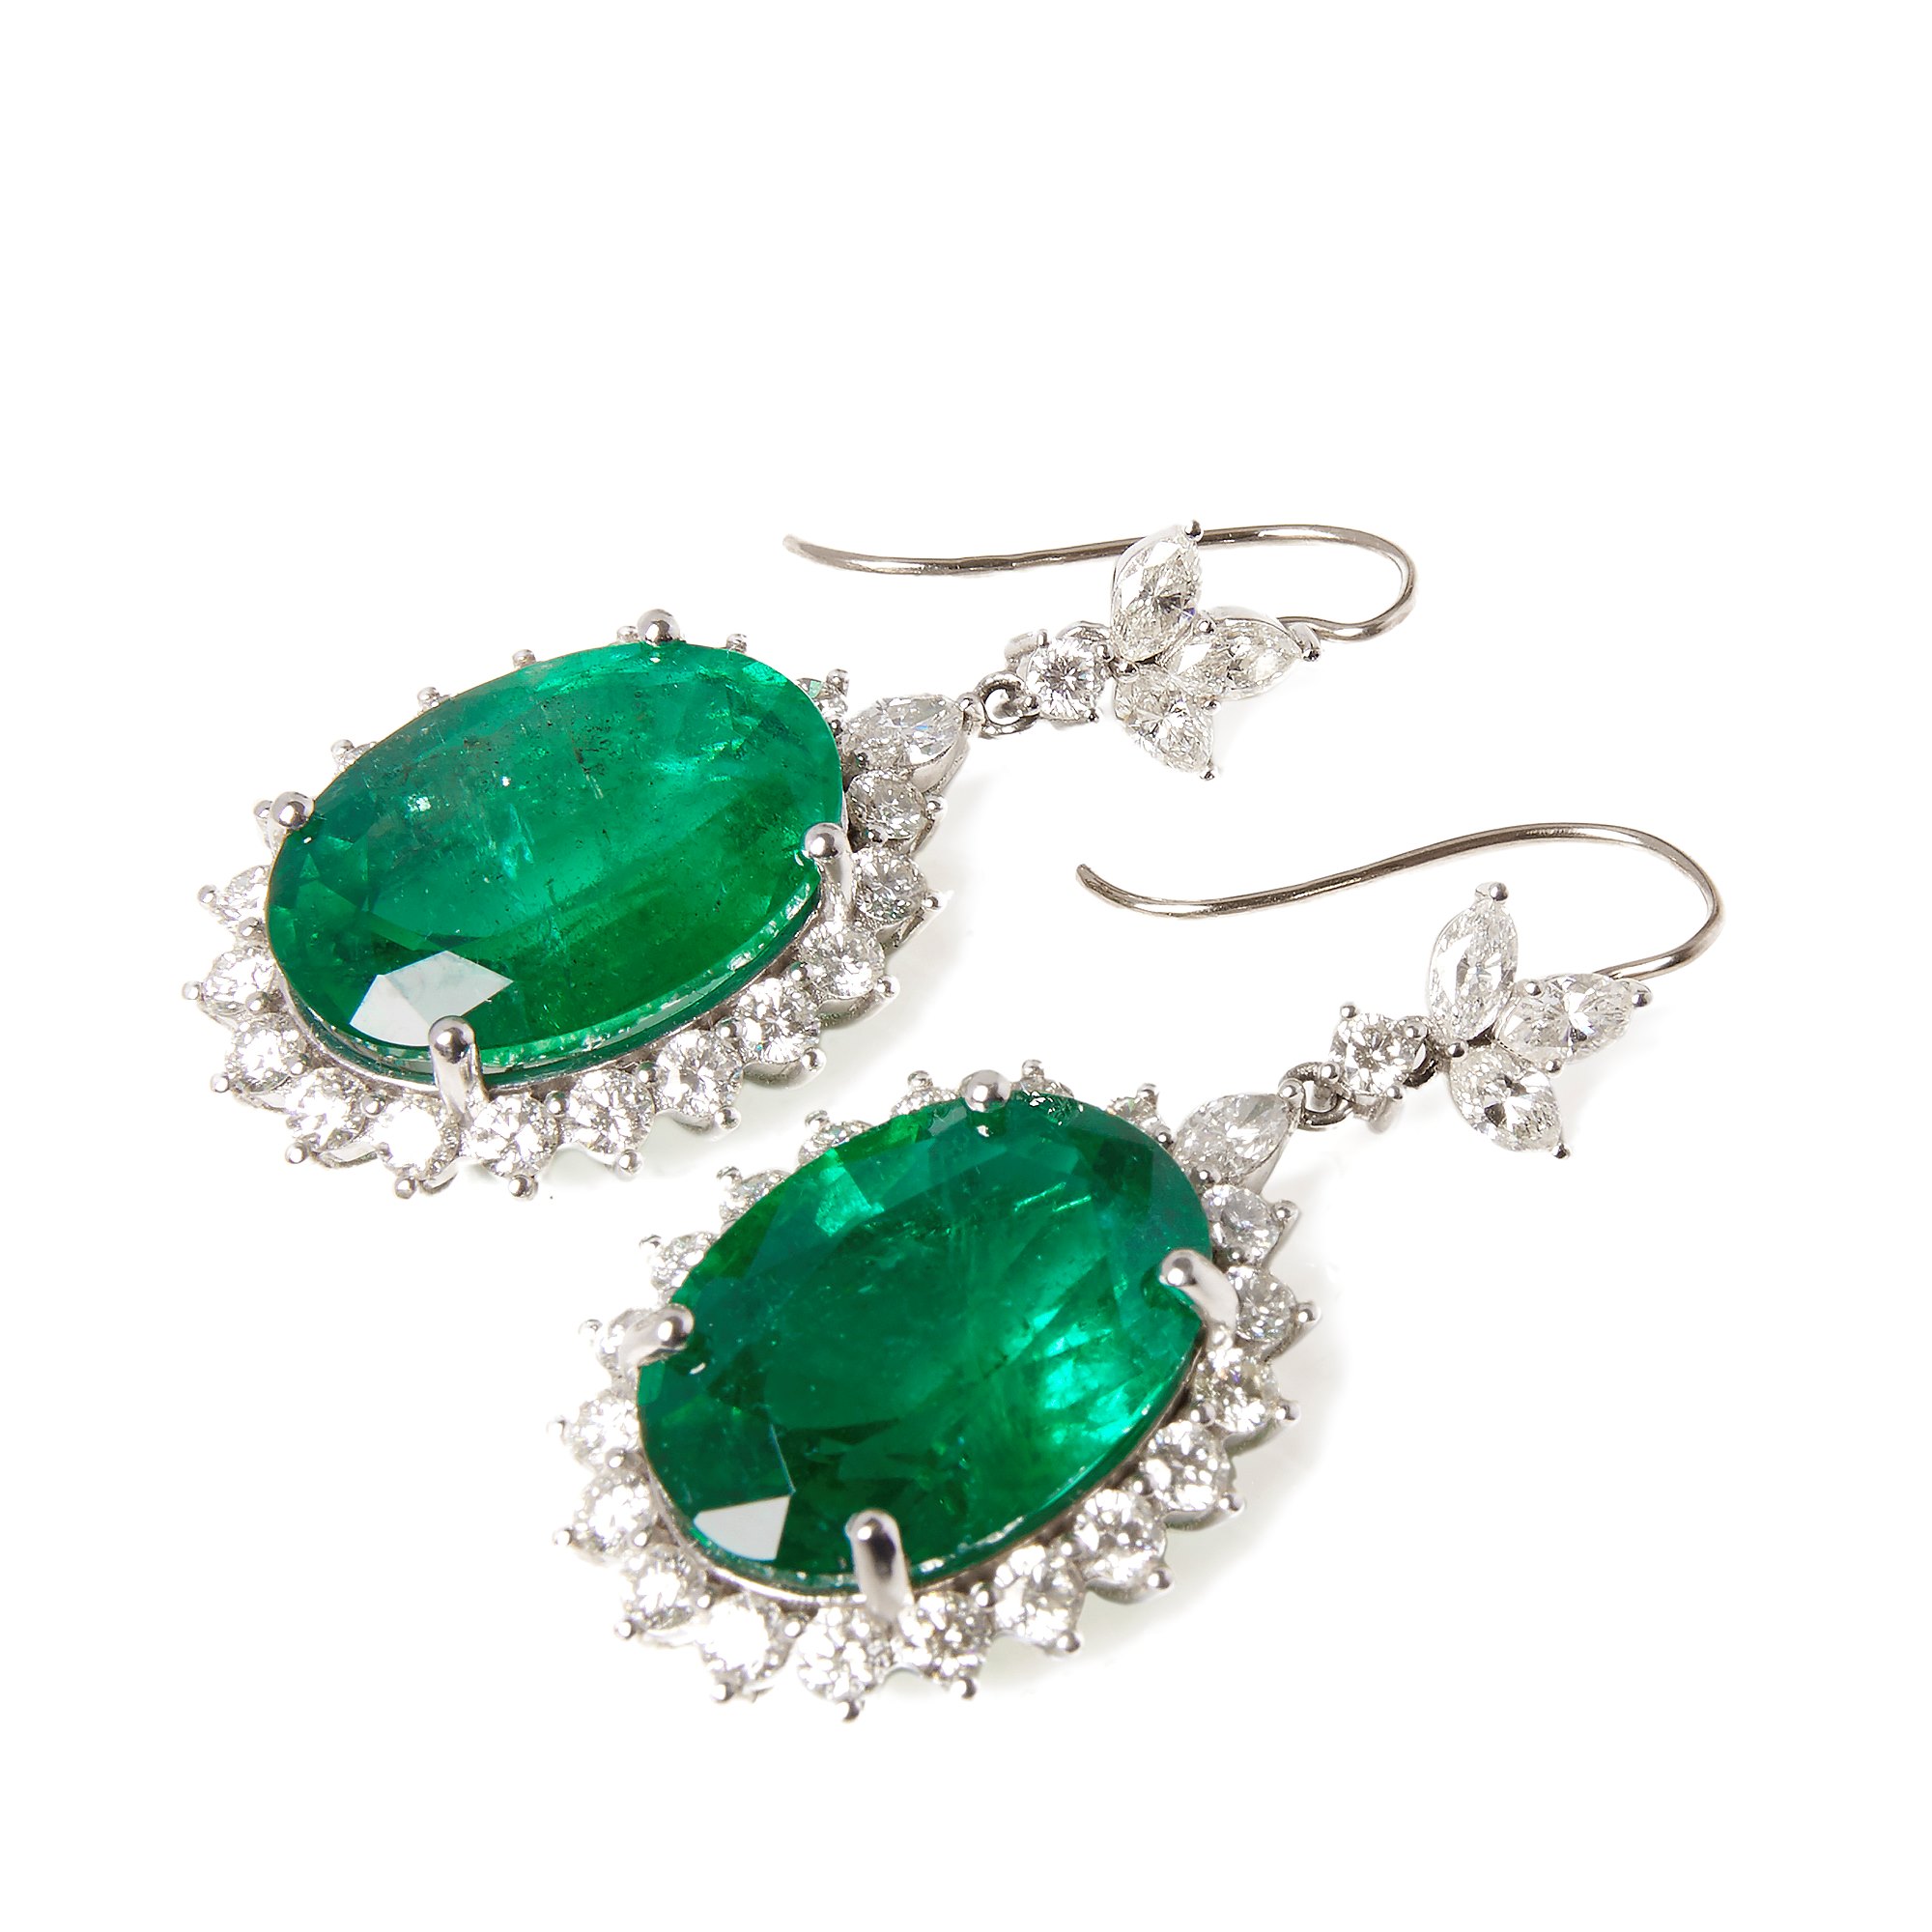 David Jerome 35.17ct Oval Cut Colombian Emerald and Diamond 18ct Gold Drop Earrings